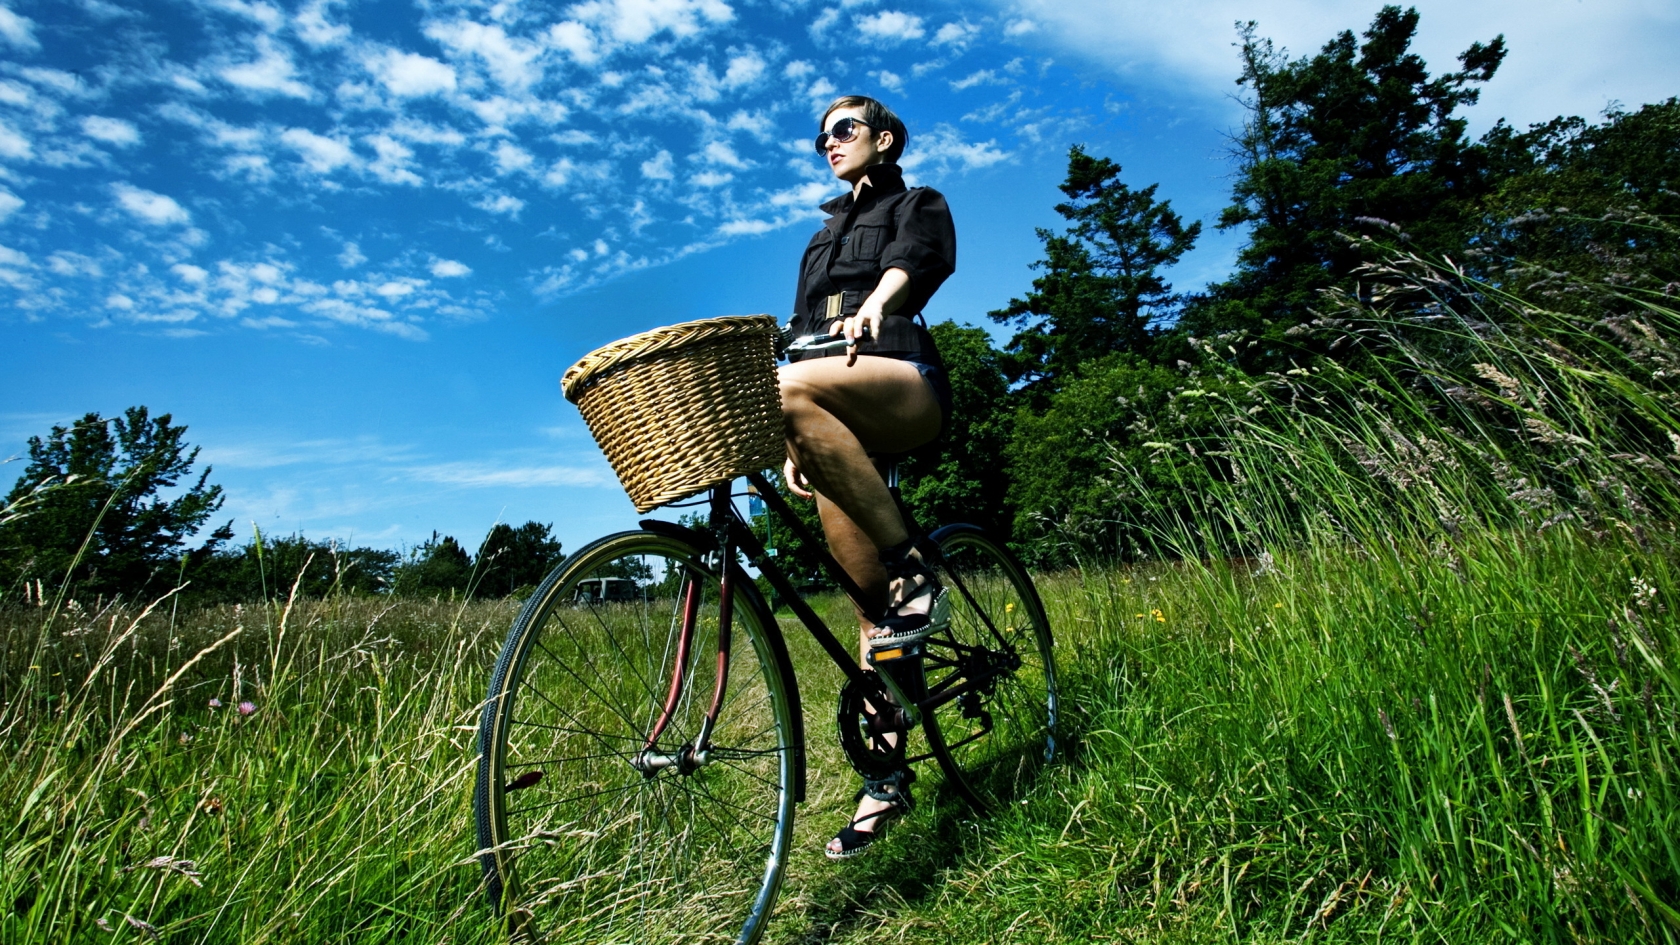 Cool Lady on Bike for 1680 x 945 HDTV resolution